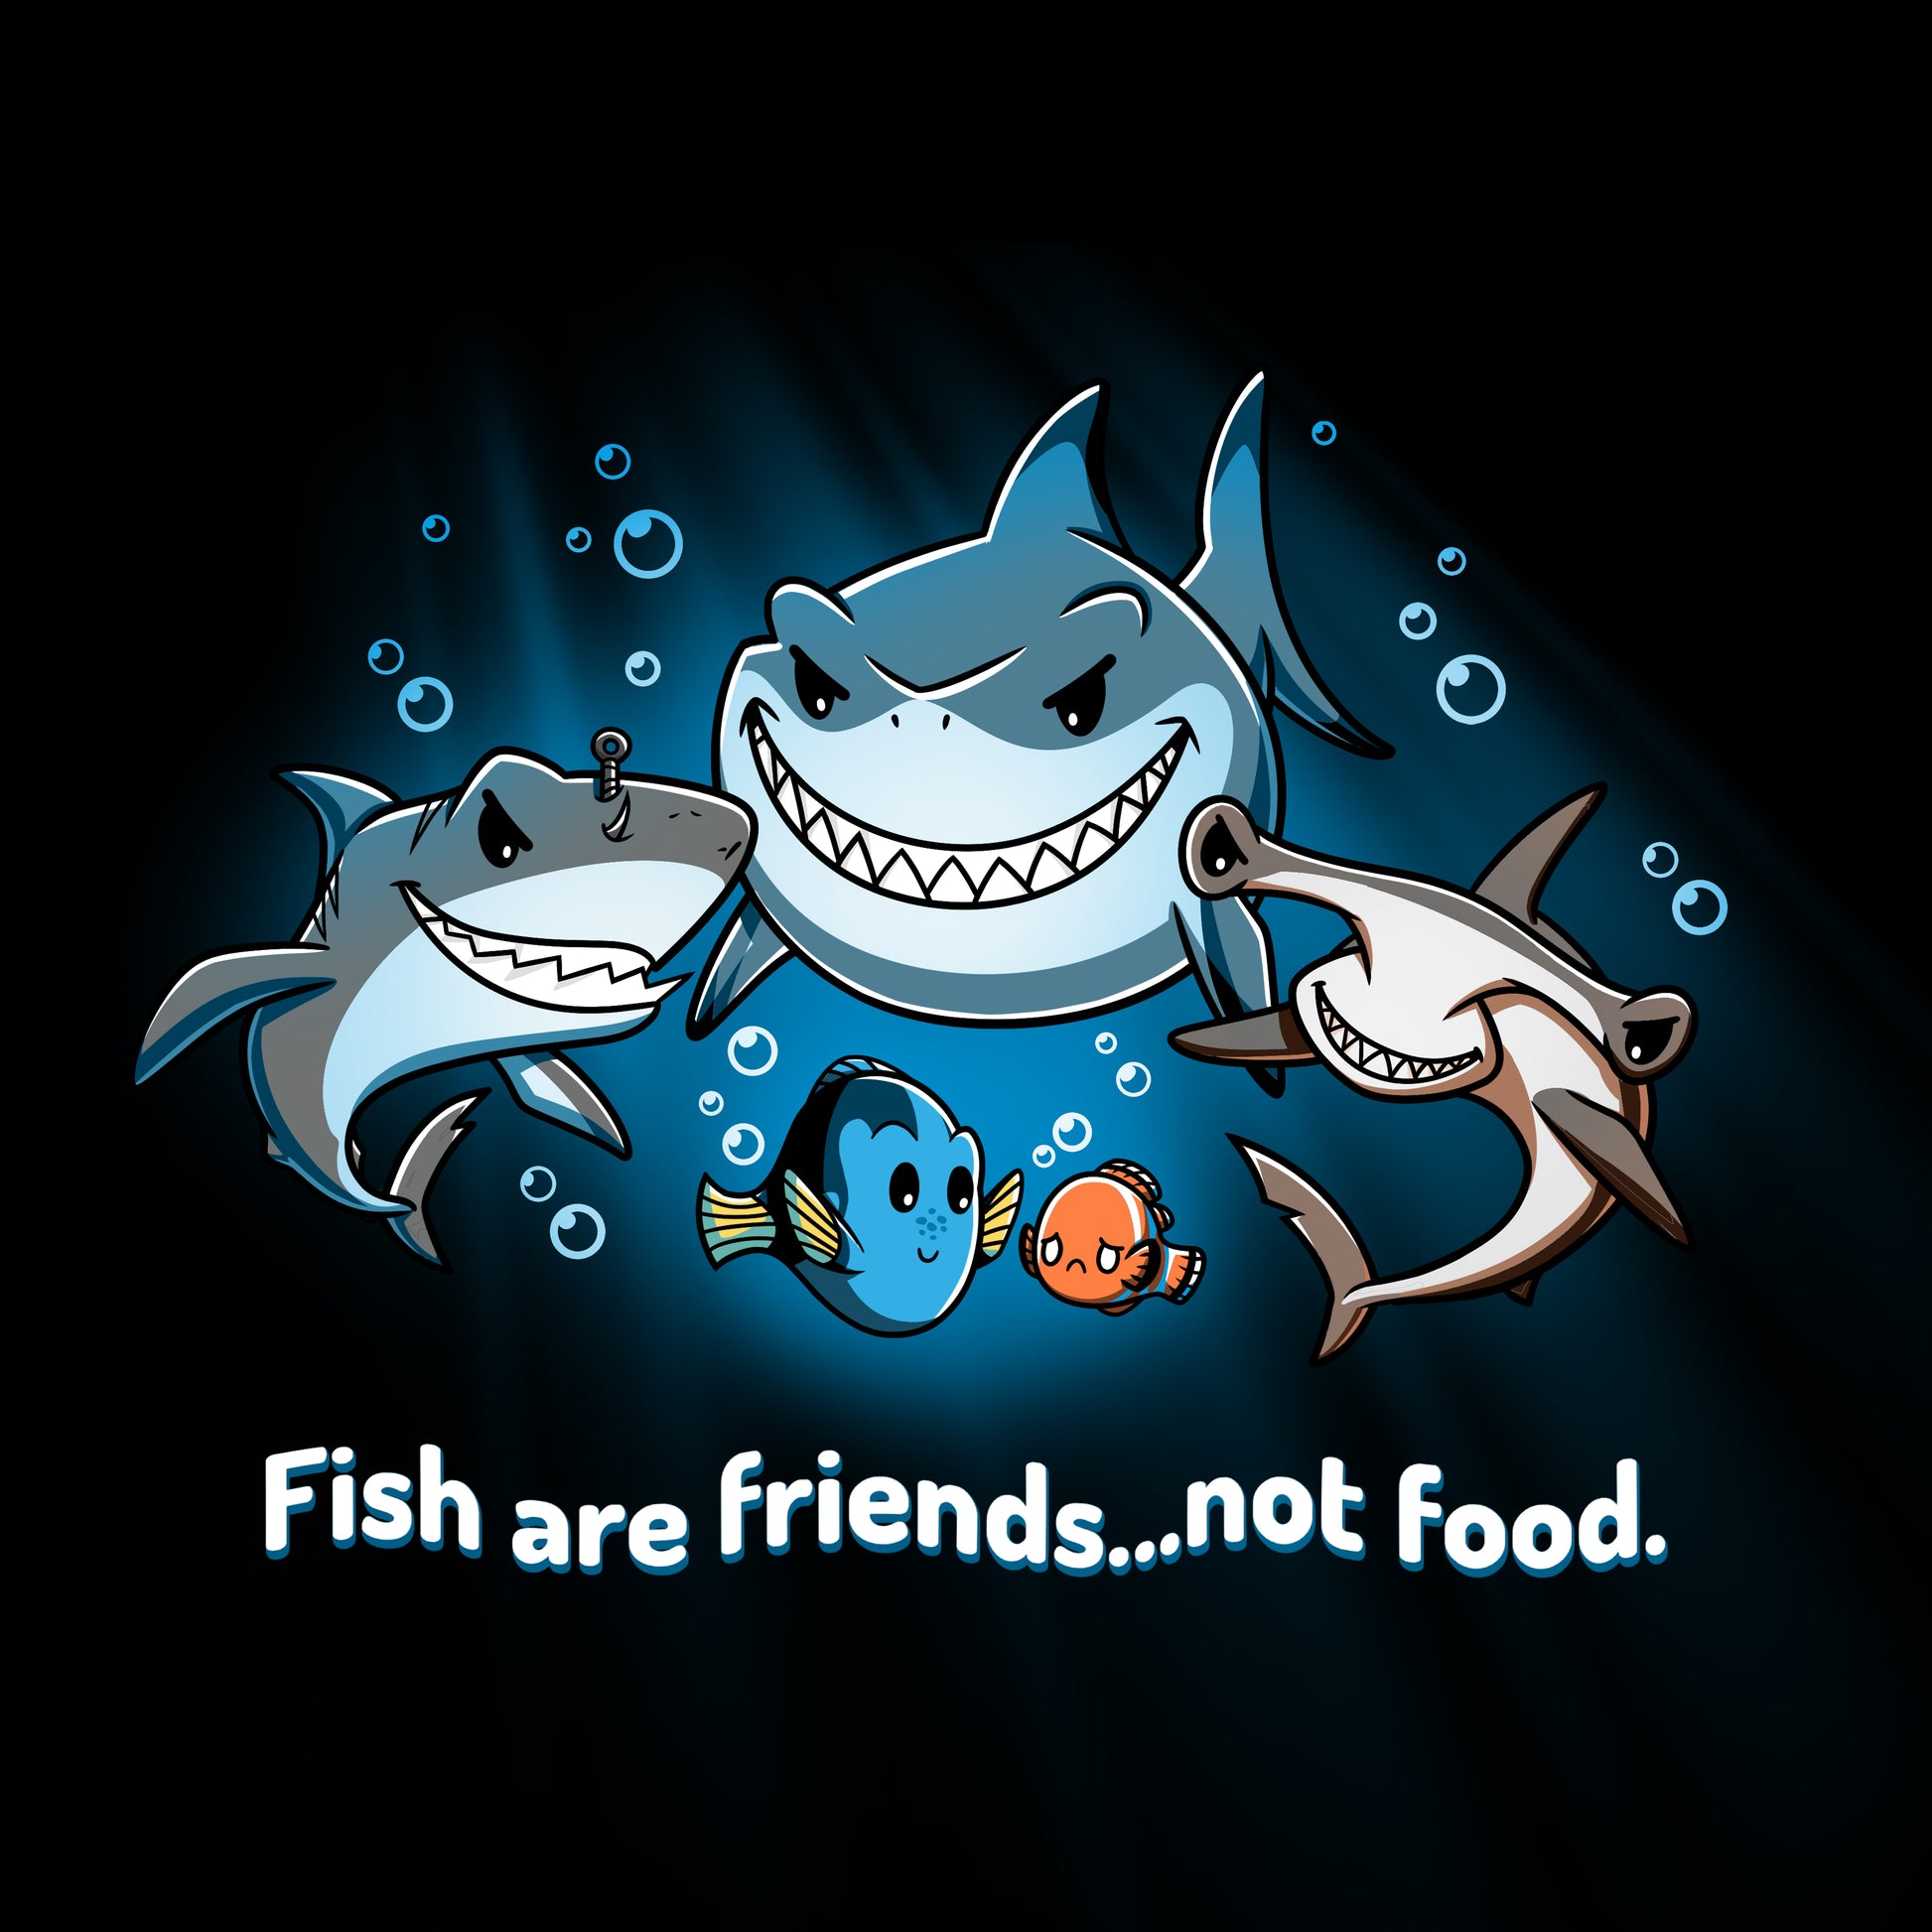 Officially licensed Pixar Finding Nemo T-Shirt featuring the iconic phrase "Fish are friends not food.